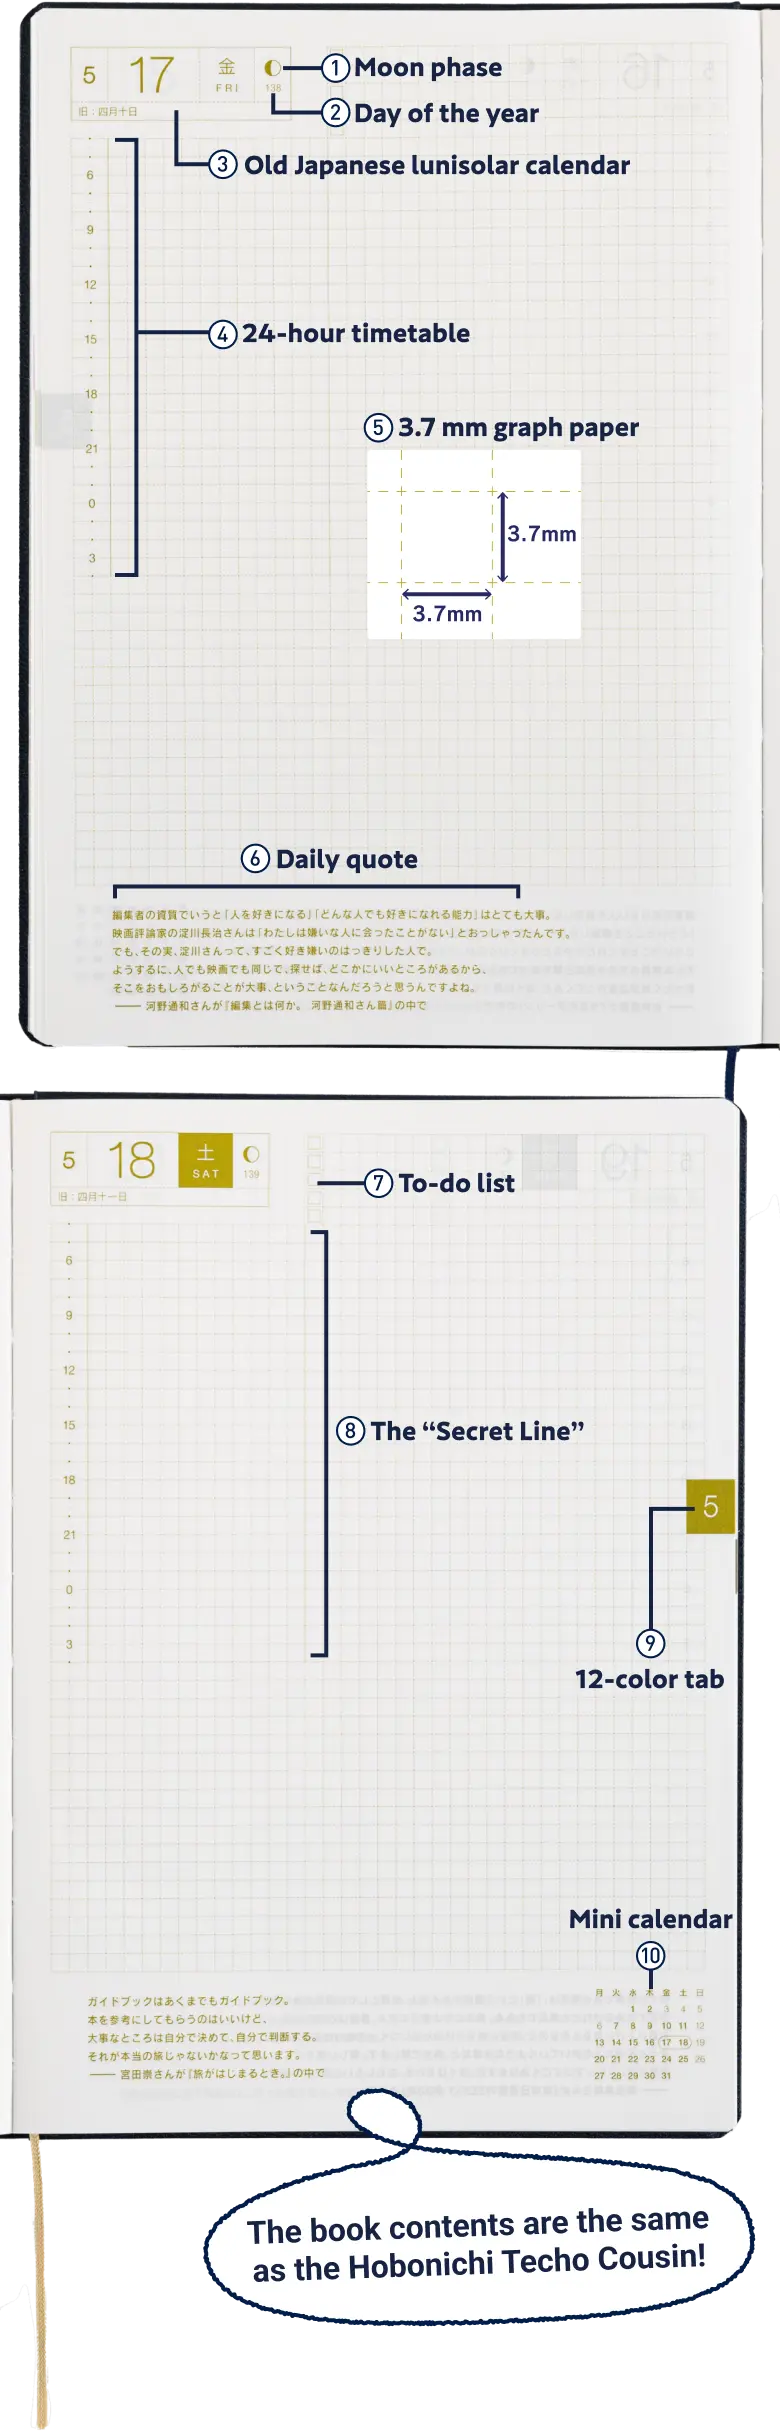 The book contents are the same as the Hobonichi Techo Cousin!